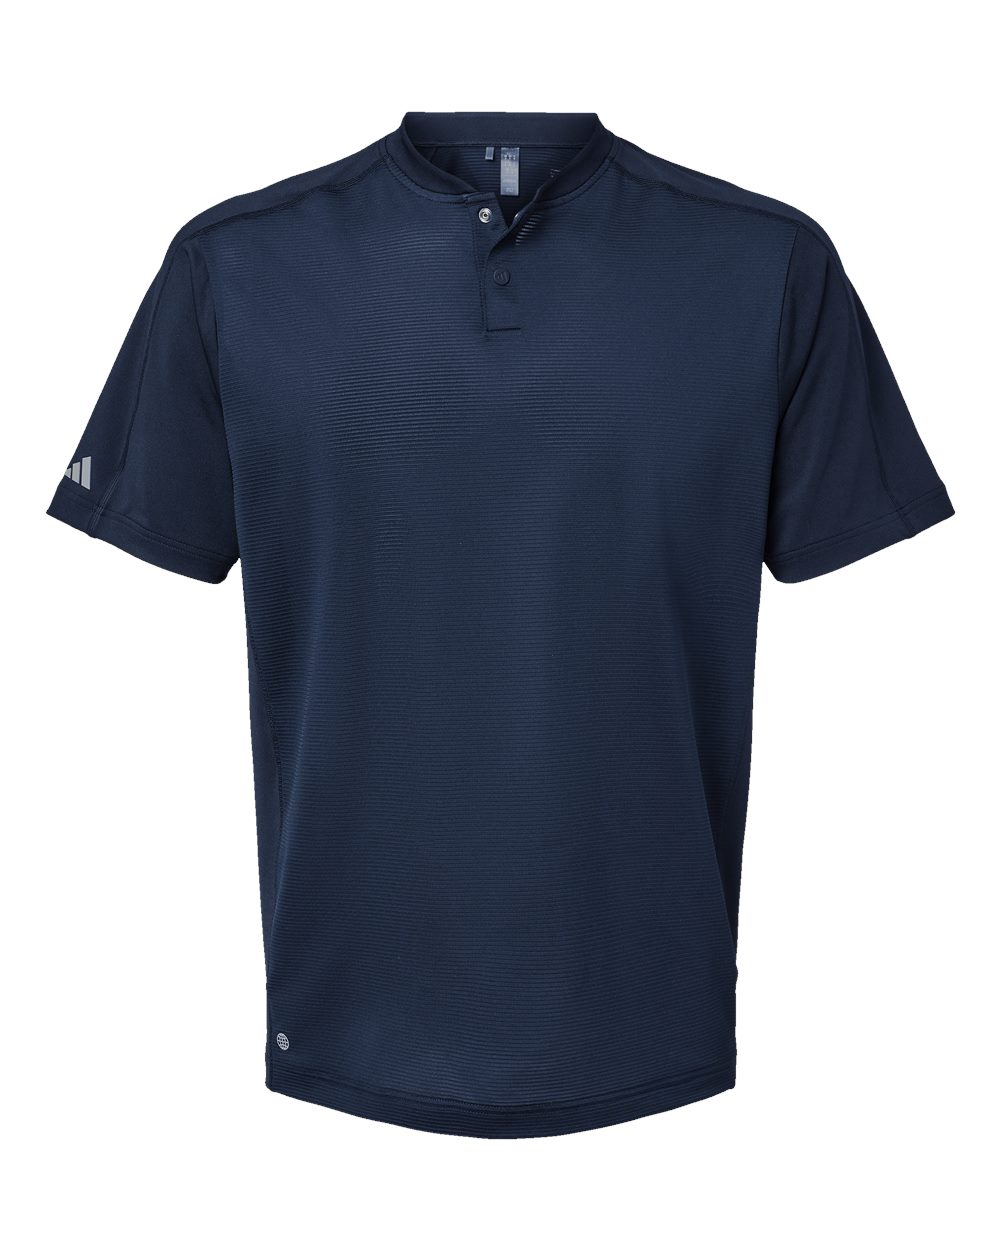 click to view Collegiate Navy